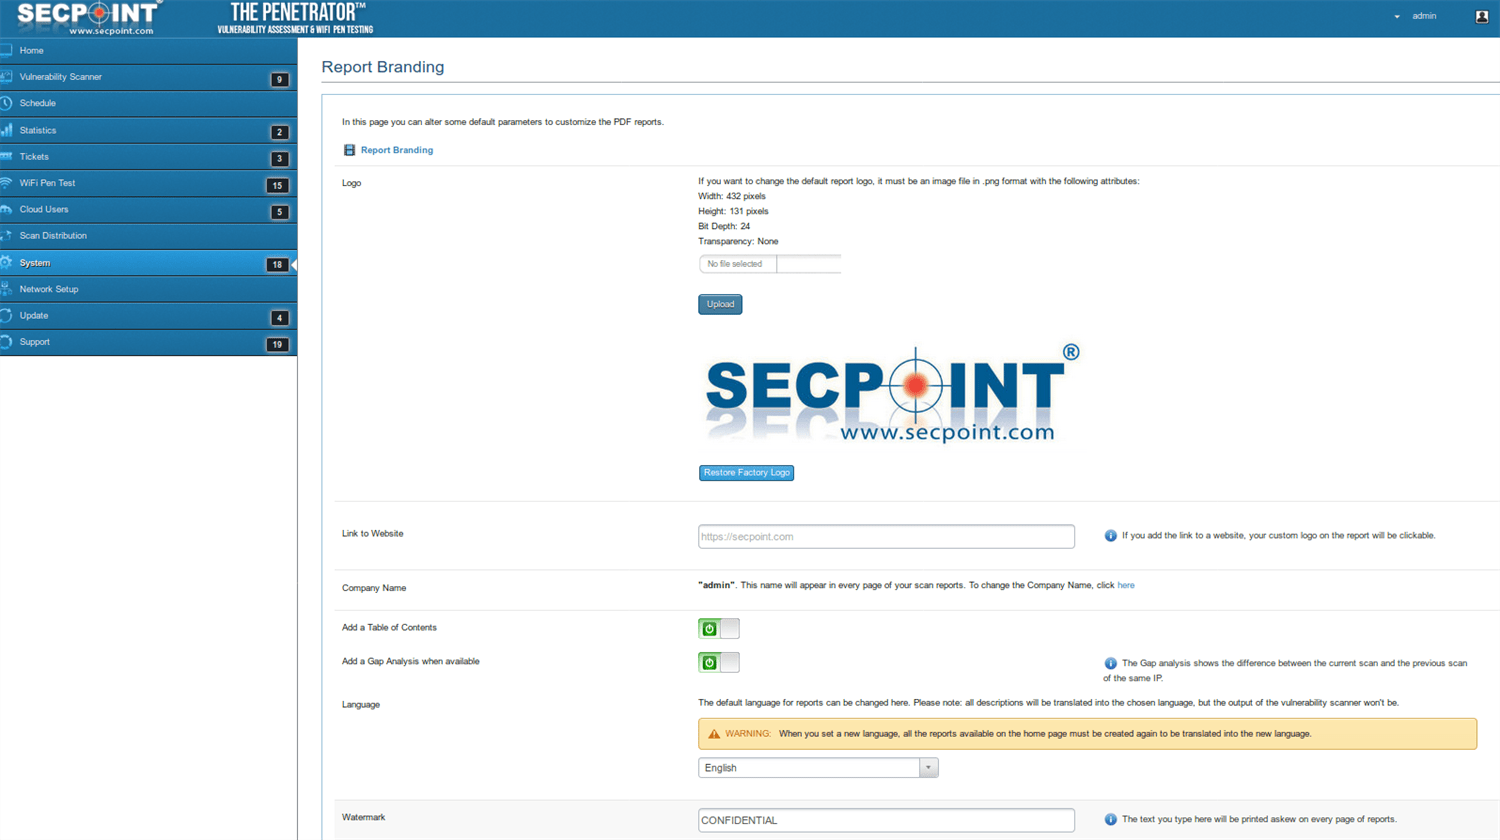 SecPoint Penetrator S9 - 512 IP Concurrent Scan License Vulnerability Scanner (1 Year License) - SecPoint